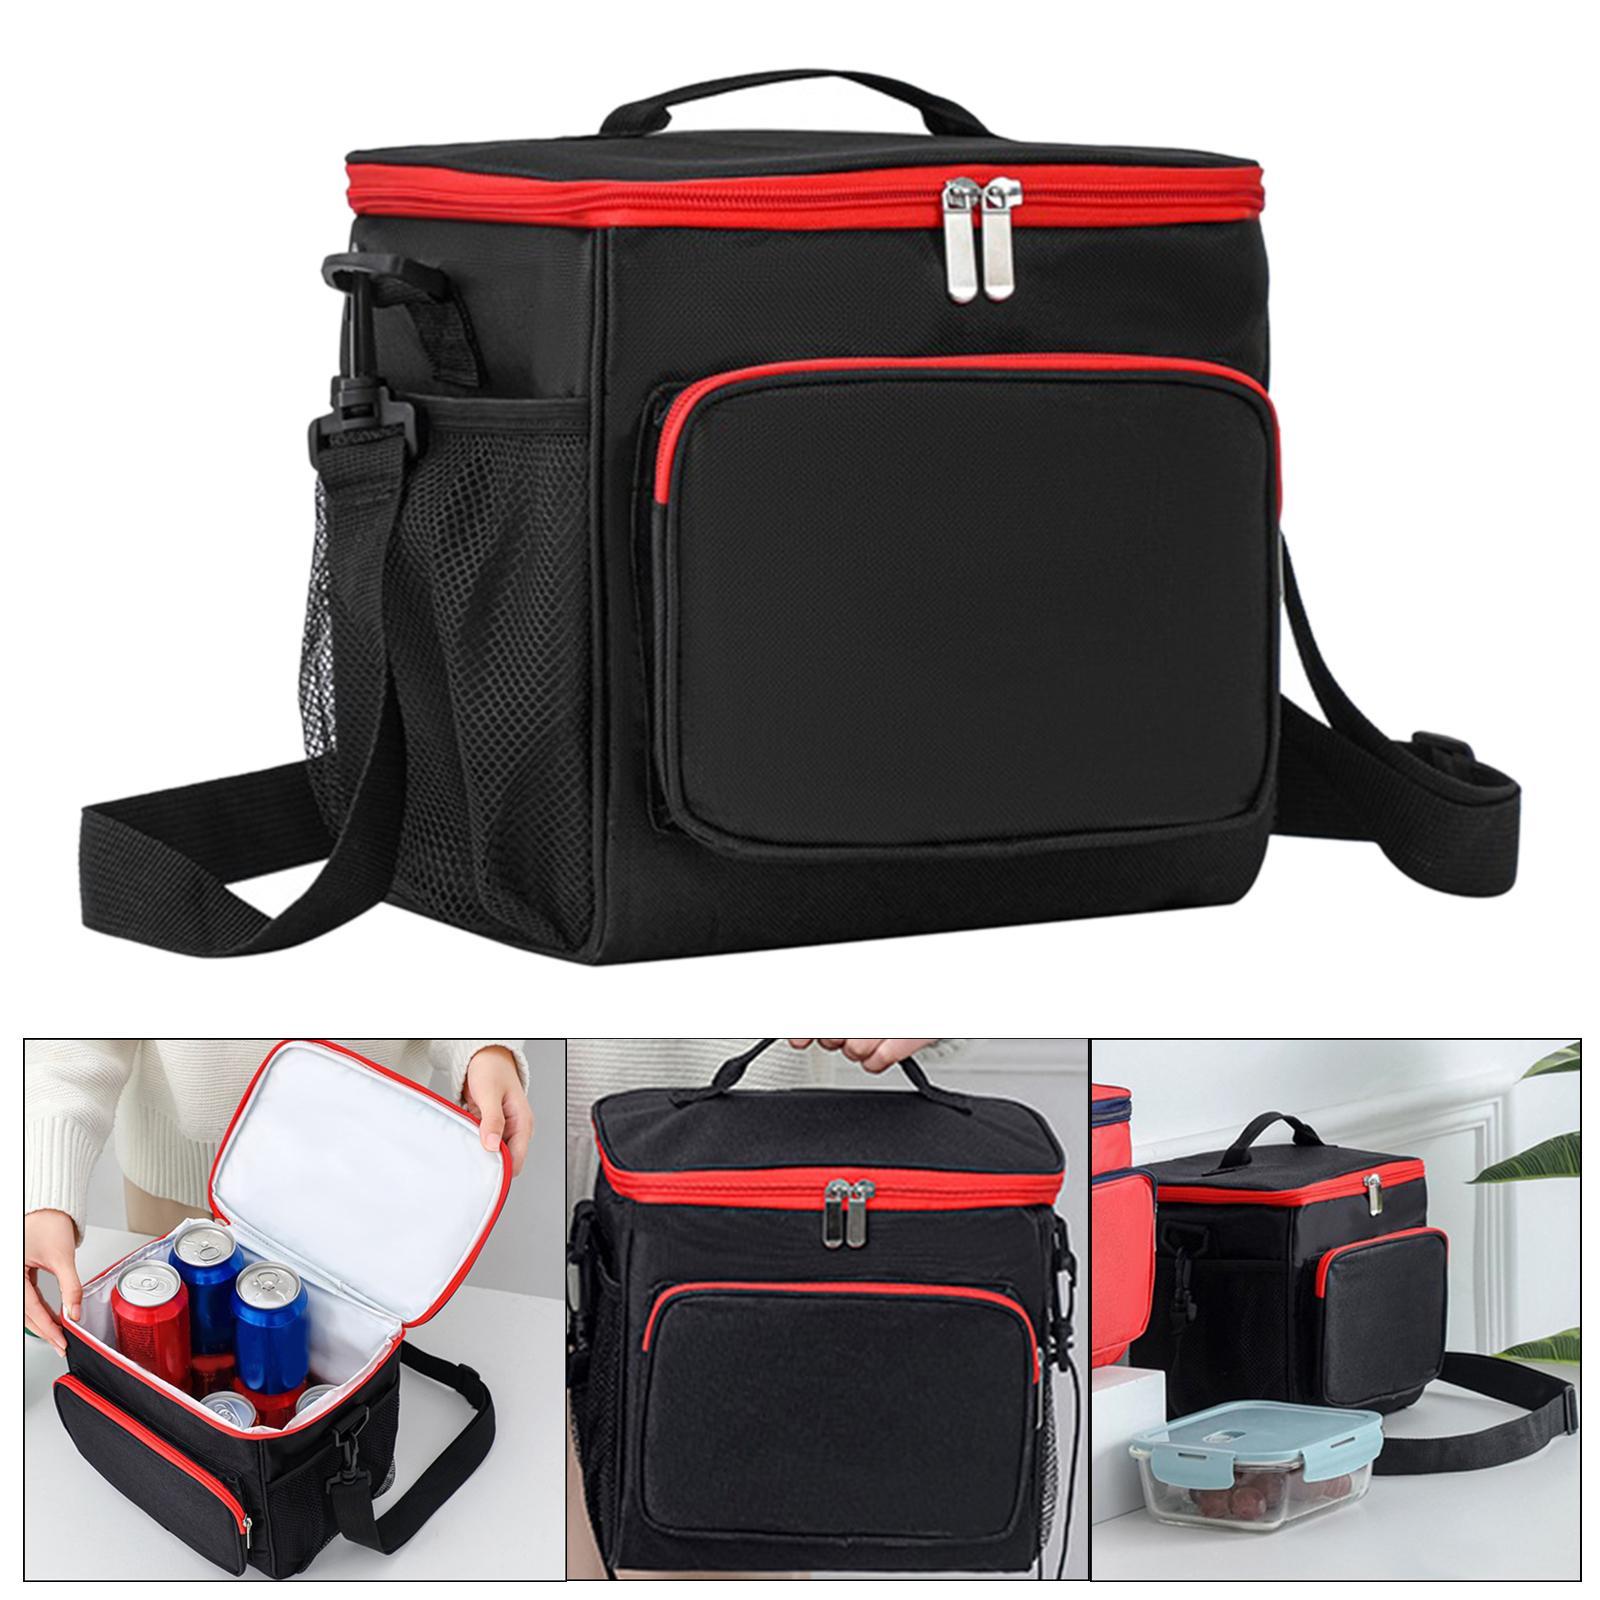 Insulated Lunch Bag Lunch Boxes Thermal Lunch Container with Adjustable Shoulder Strap for Work Beach